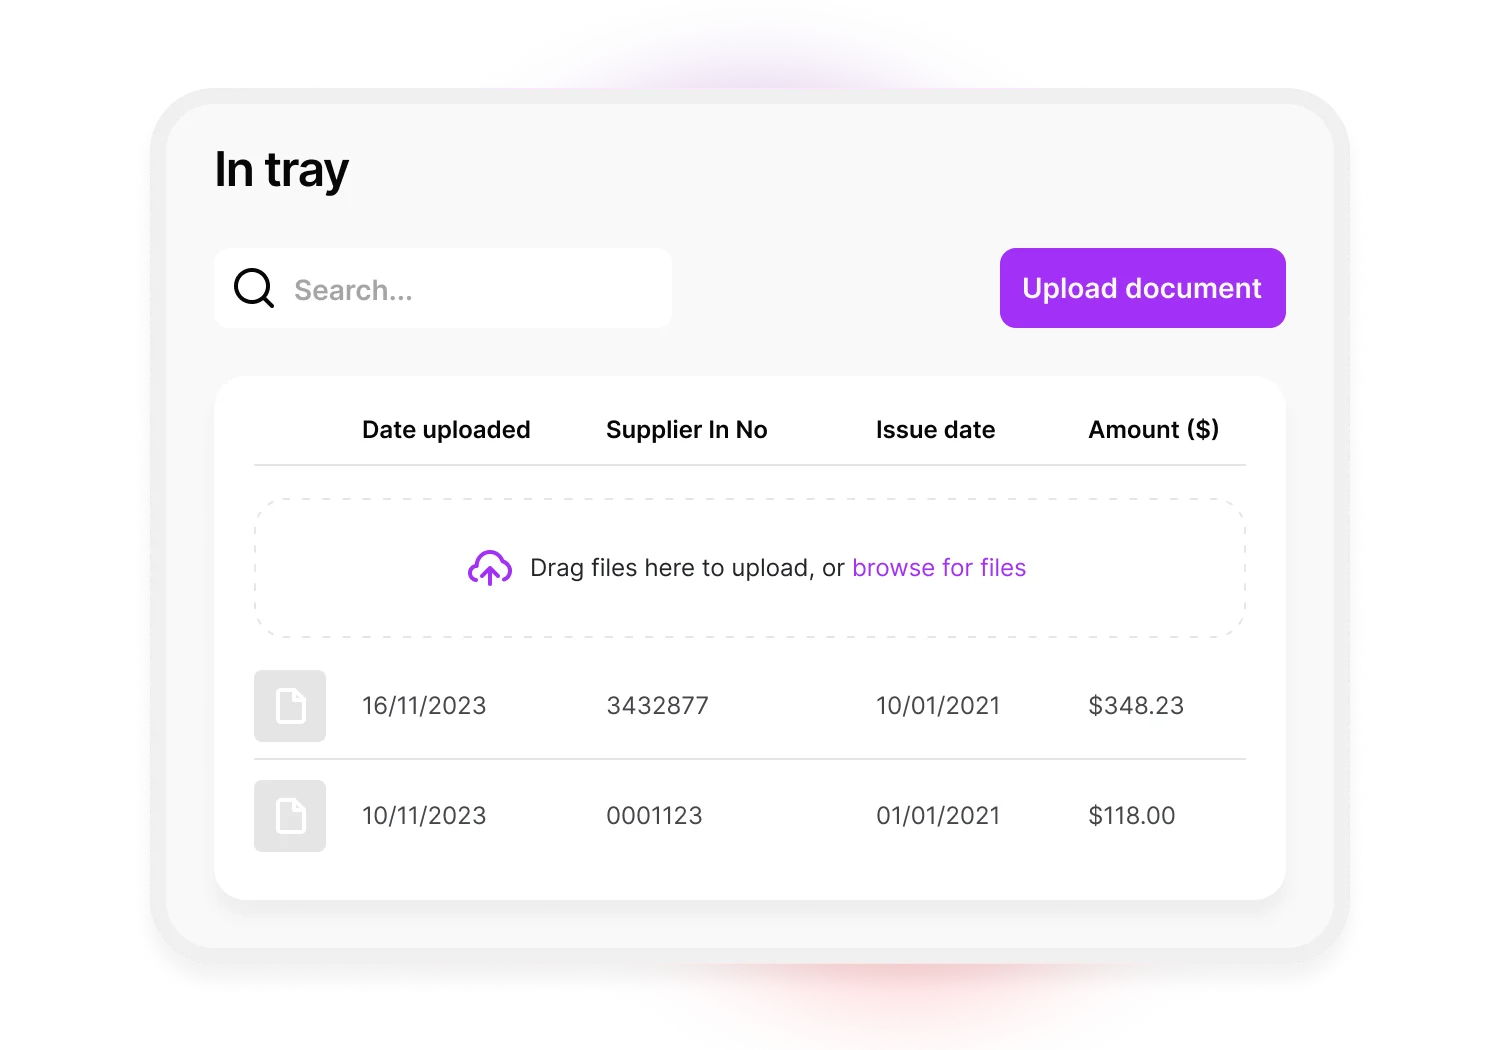 An illustrated version of the In Tray. Here you can see that you can upload a document or view documents sent via supplier accounts. You can see the date uploaded, supplier number, issue date and bill amount. You also have the option to search for the bill you're looking for.